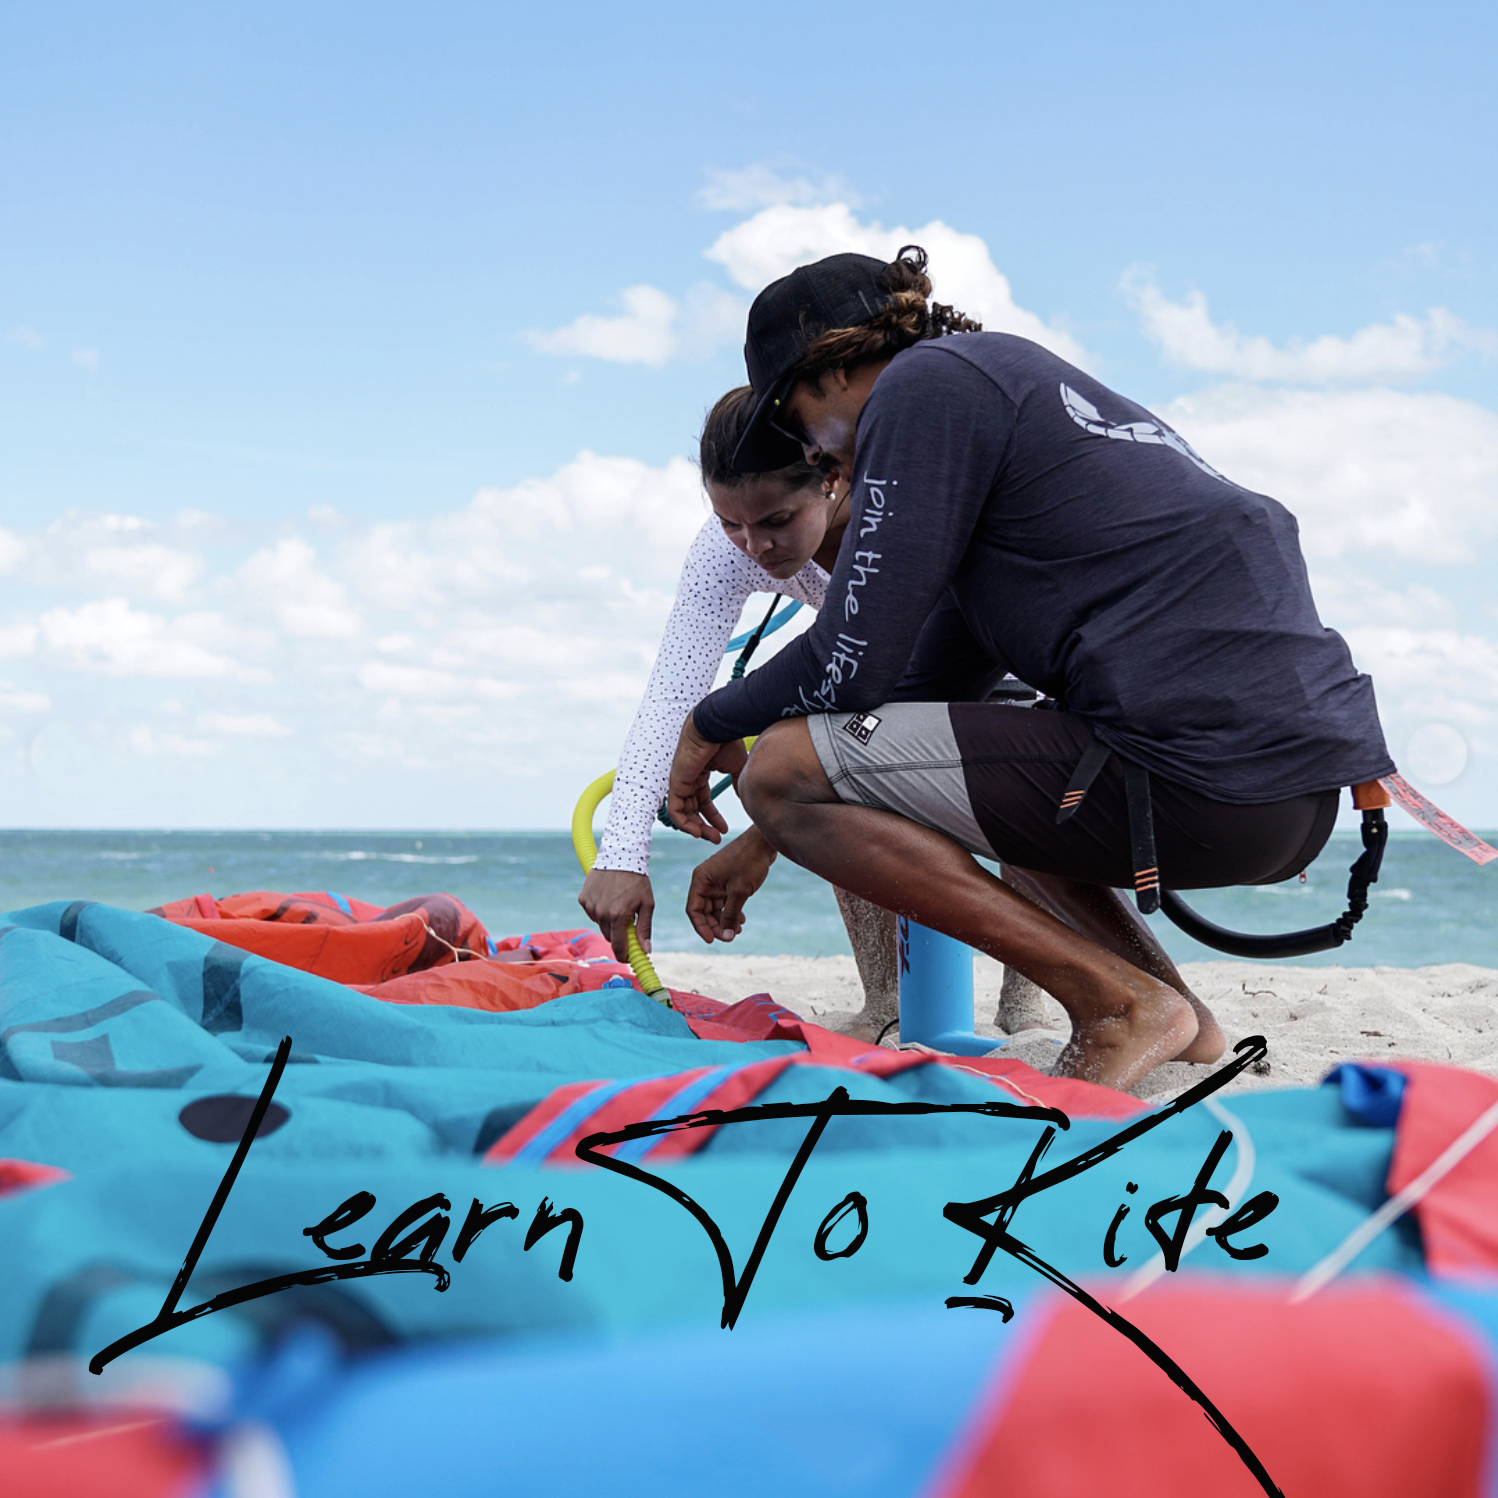 TKSMIAMI kite instructor giving a class of how to prepare a kite for flying